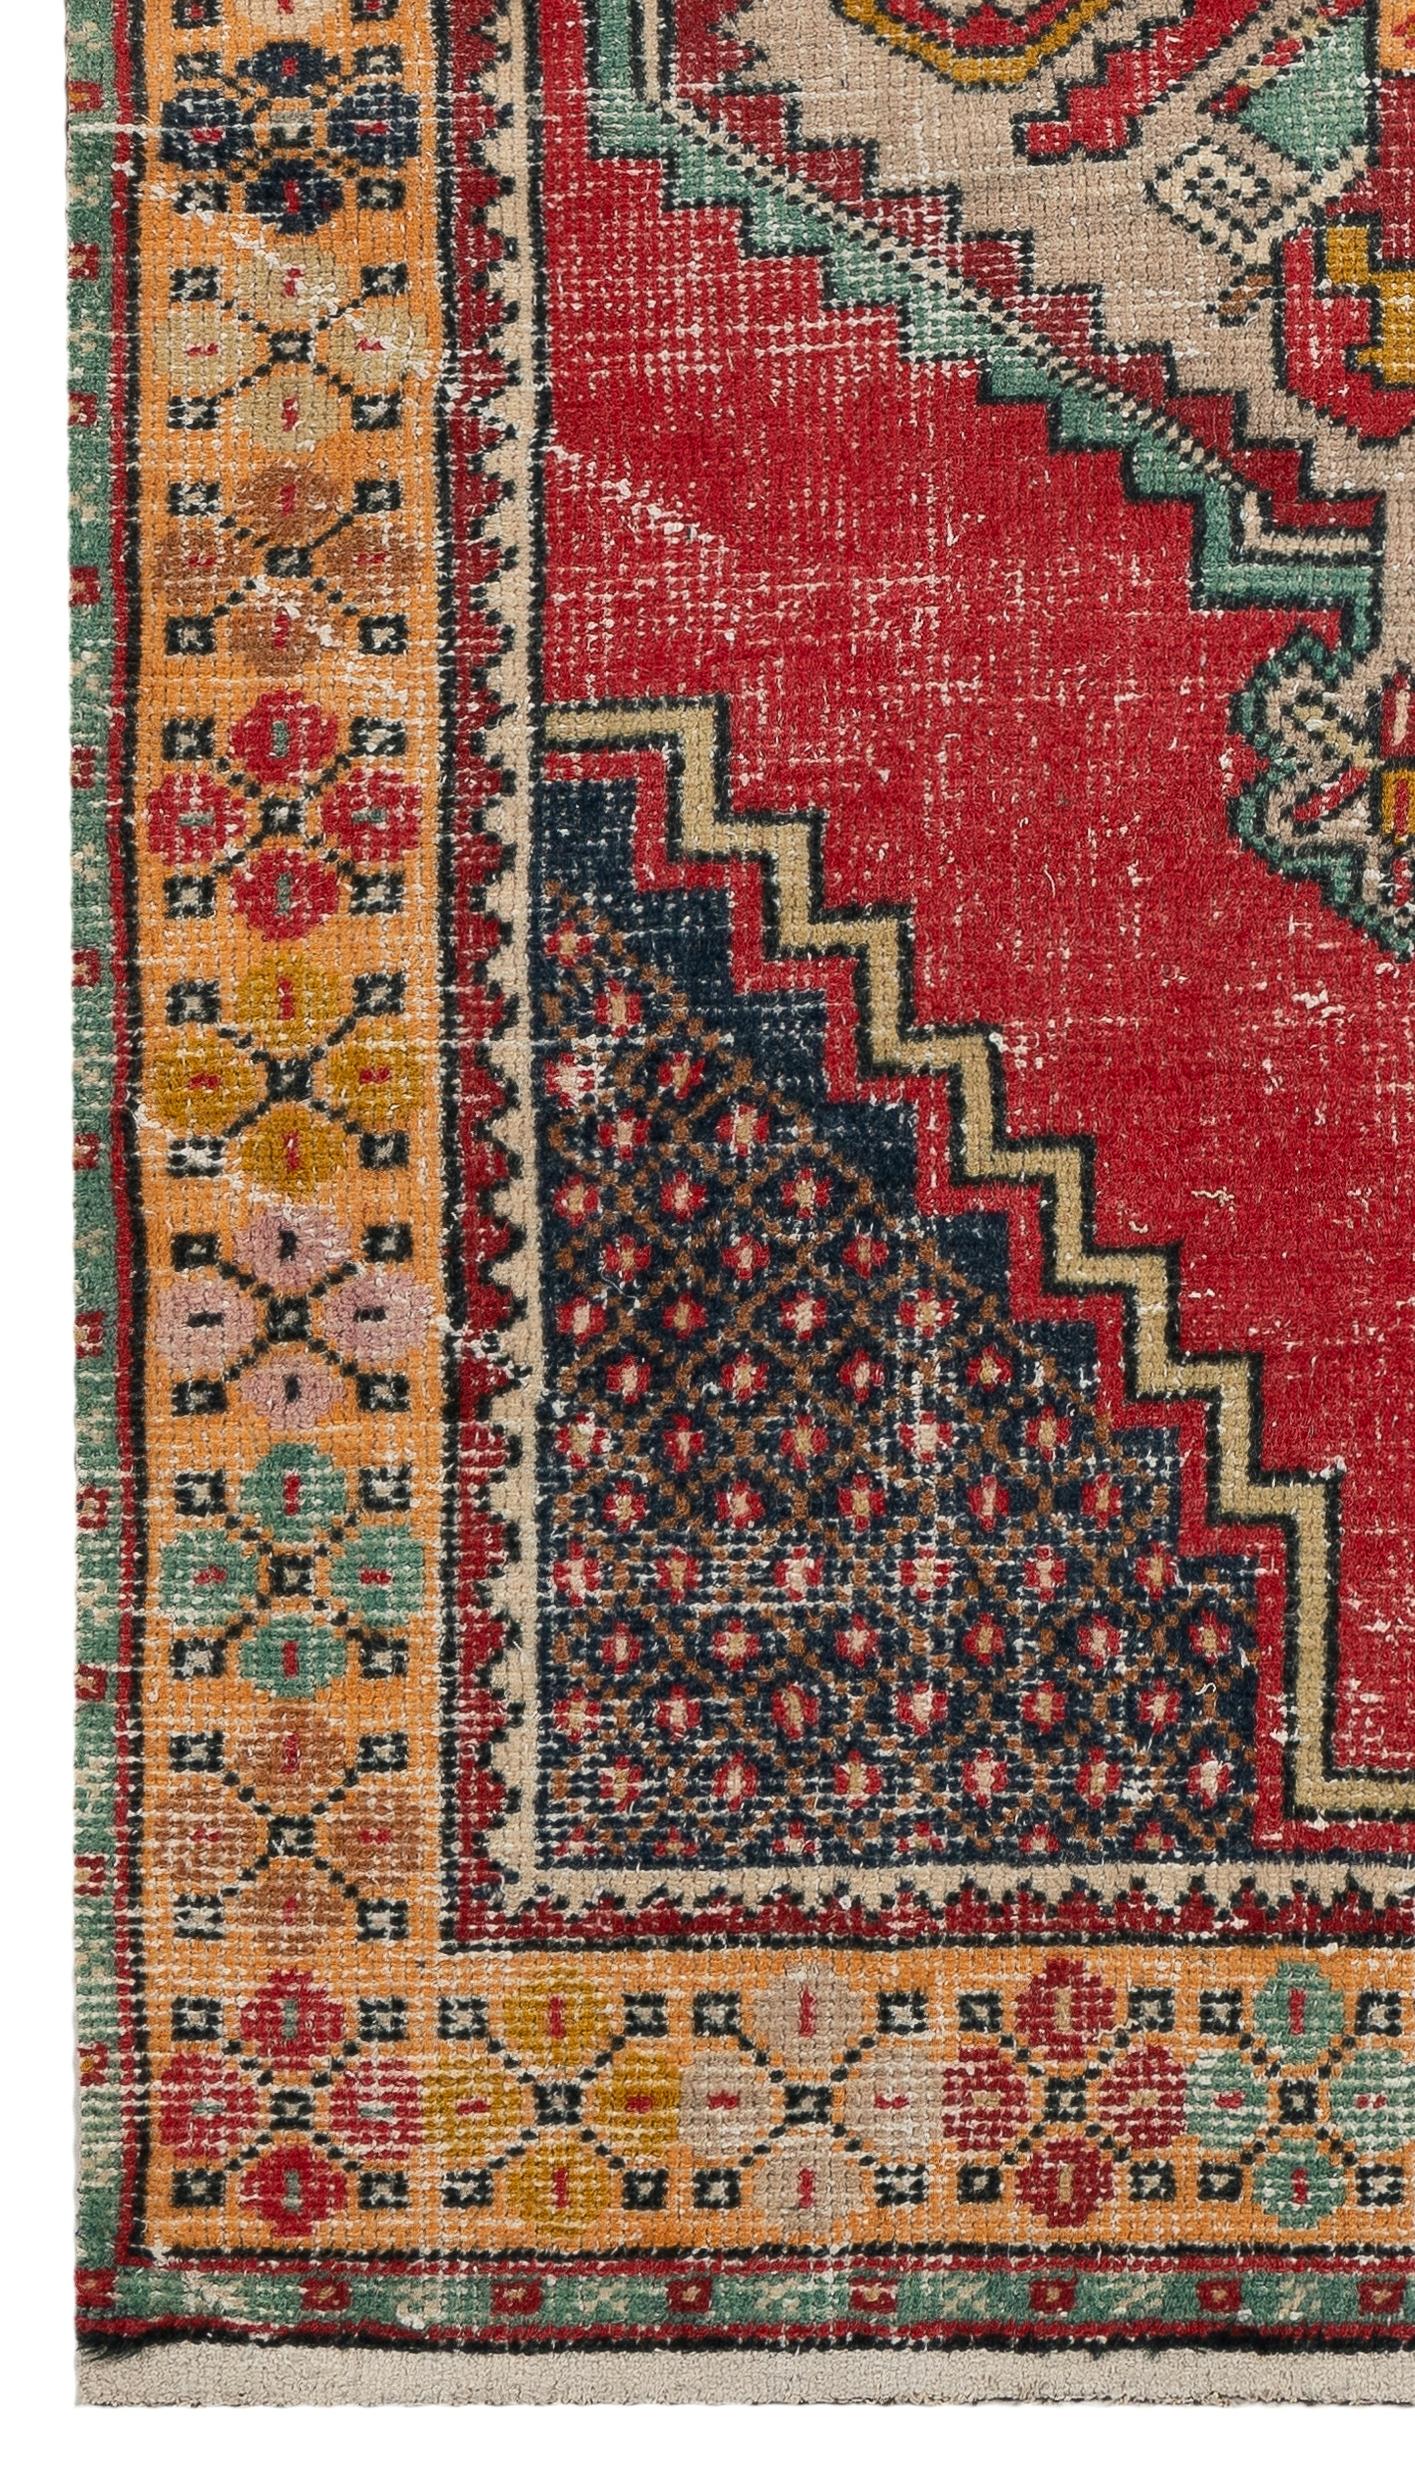 Hand-Knotted 3.6x6 Ft Vintage Handmade Turkish Wool Oriental Rug in Vibrant & Warm Colors For Sale